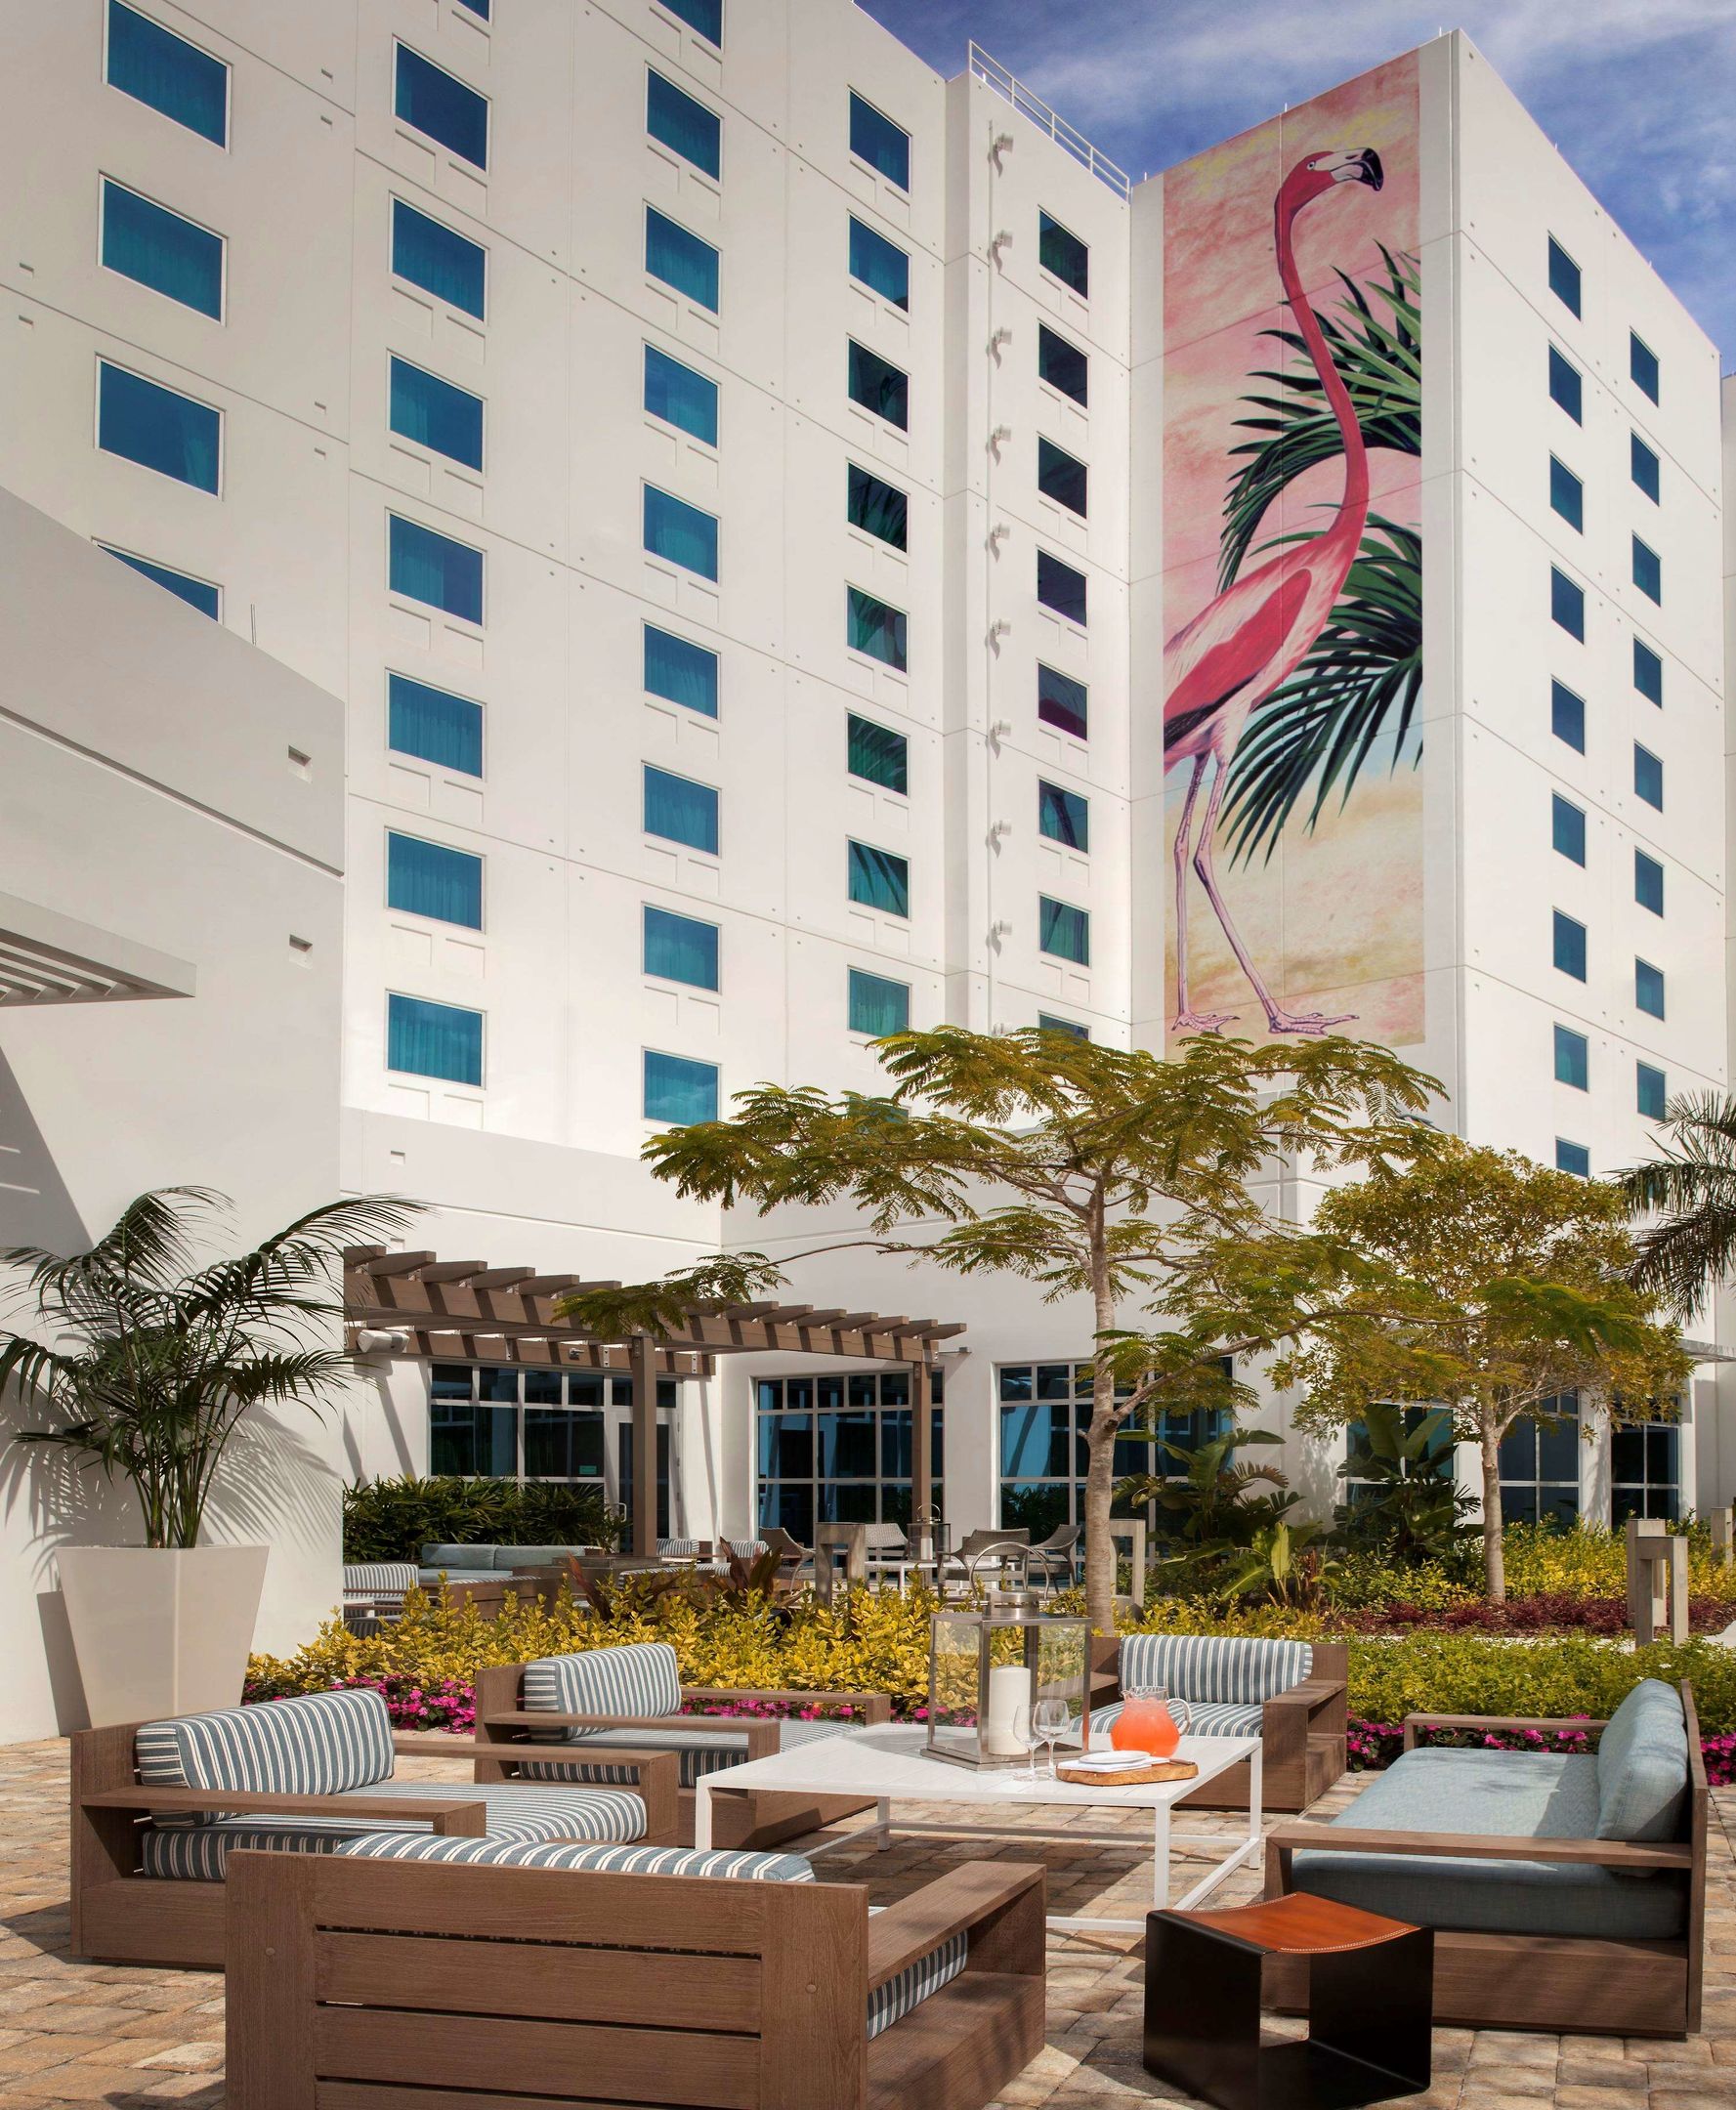 Homewood Suites by Hilton Miami Dolphin Mall